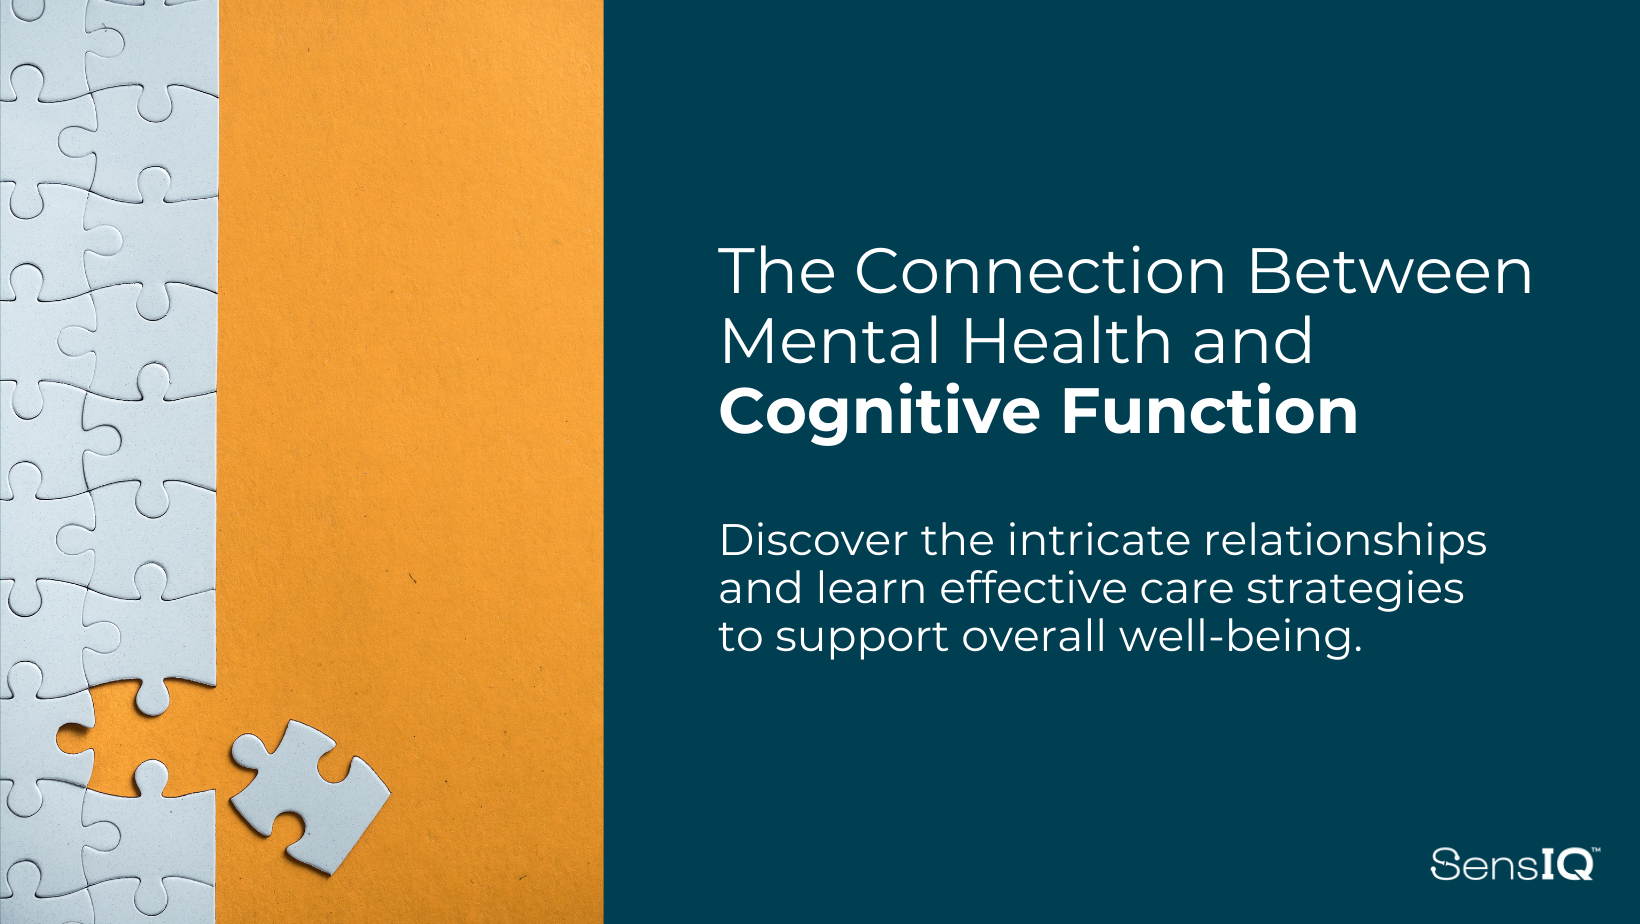 The Connection Between Mental Health and Cognitive Function